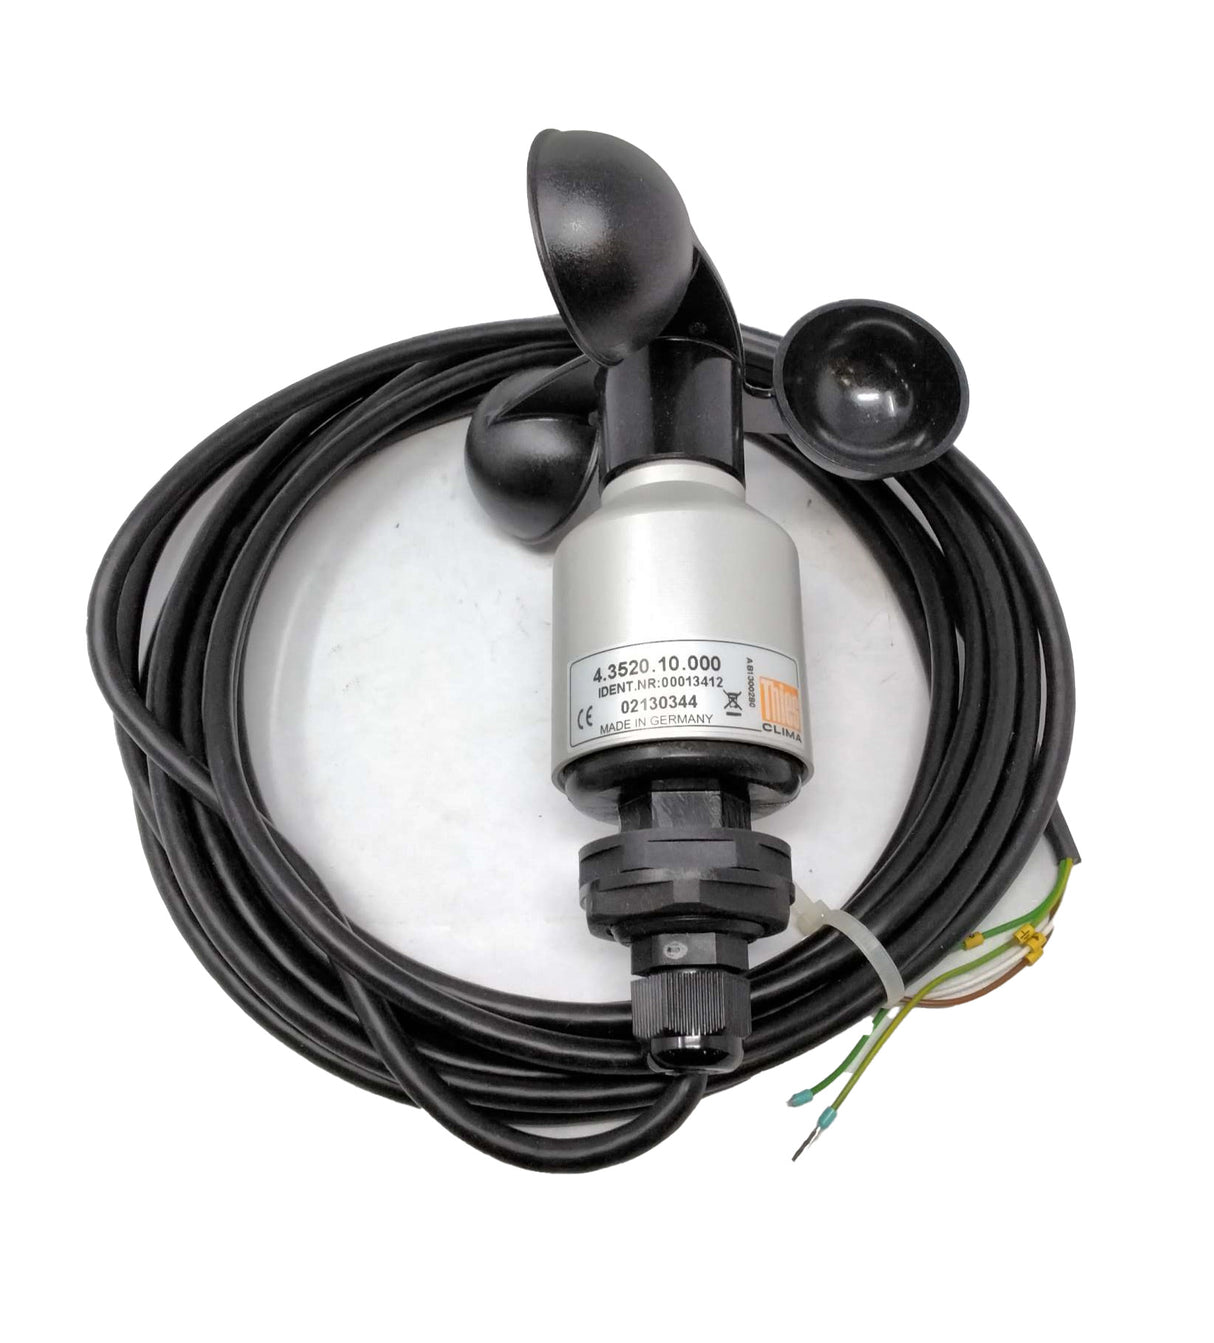 THIES CLIMA ­-­ 4.3520.10.000 ­-­ ANEMOMETER - UNHEATED COMPACT WIND TRANSMITTER